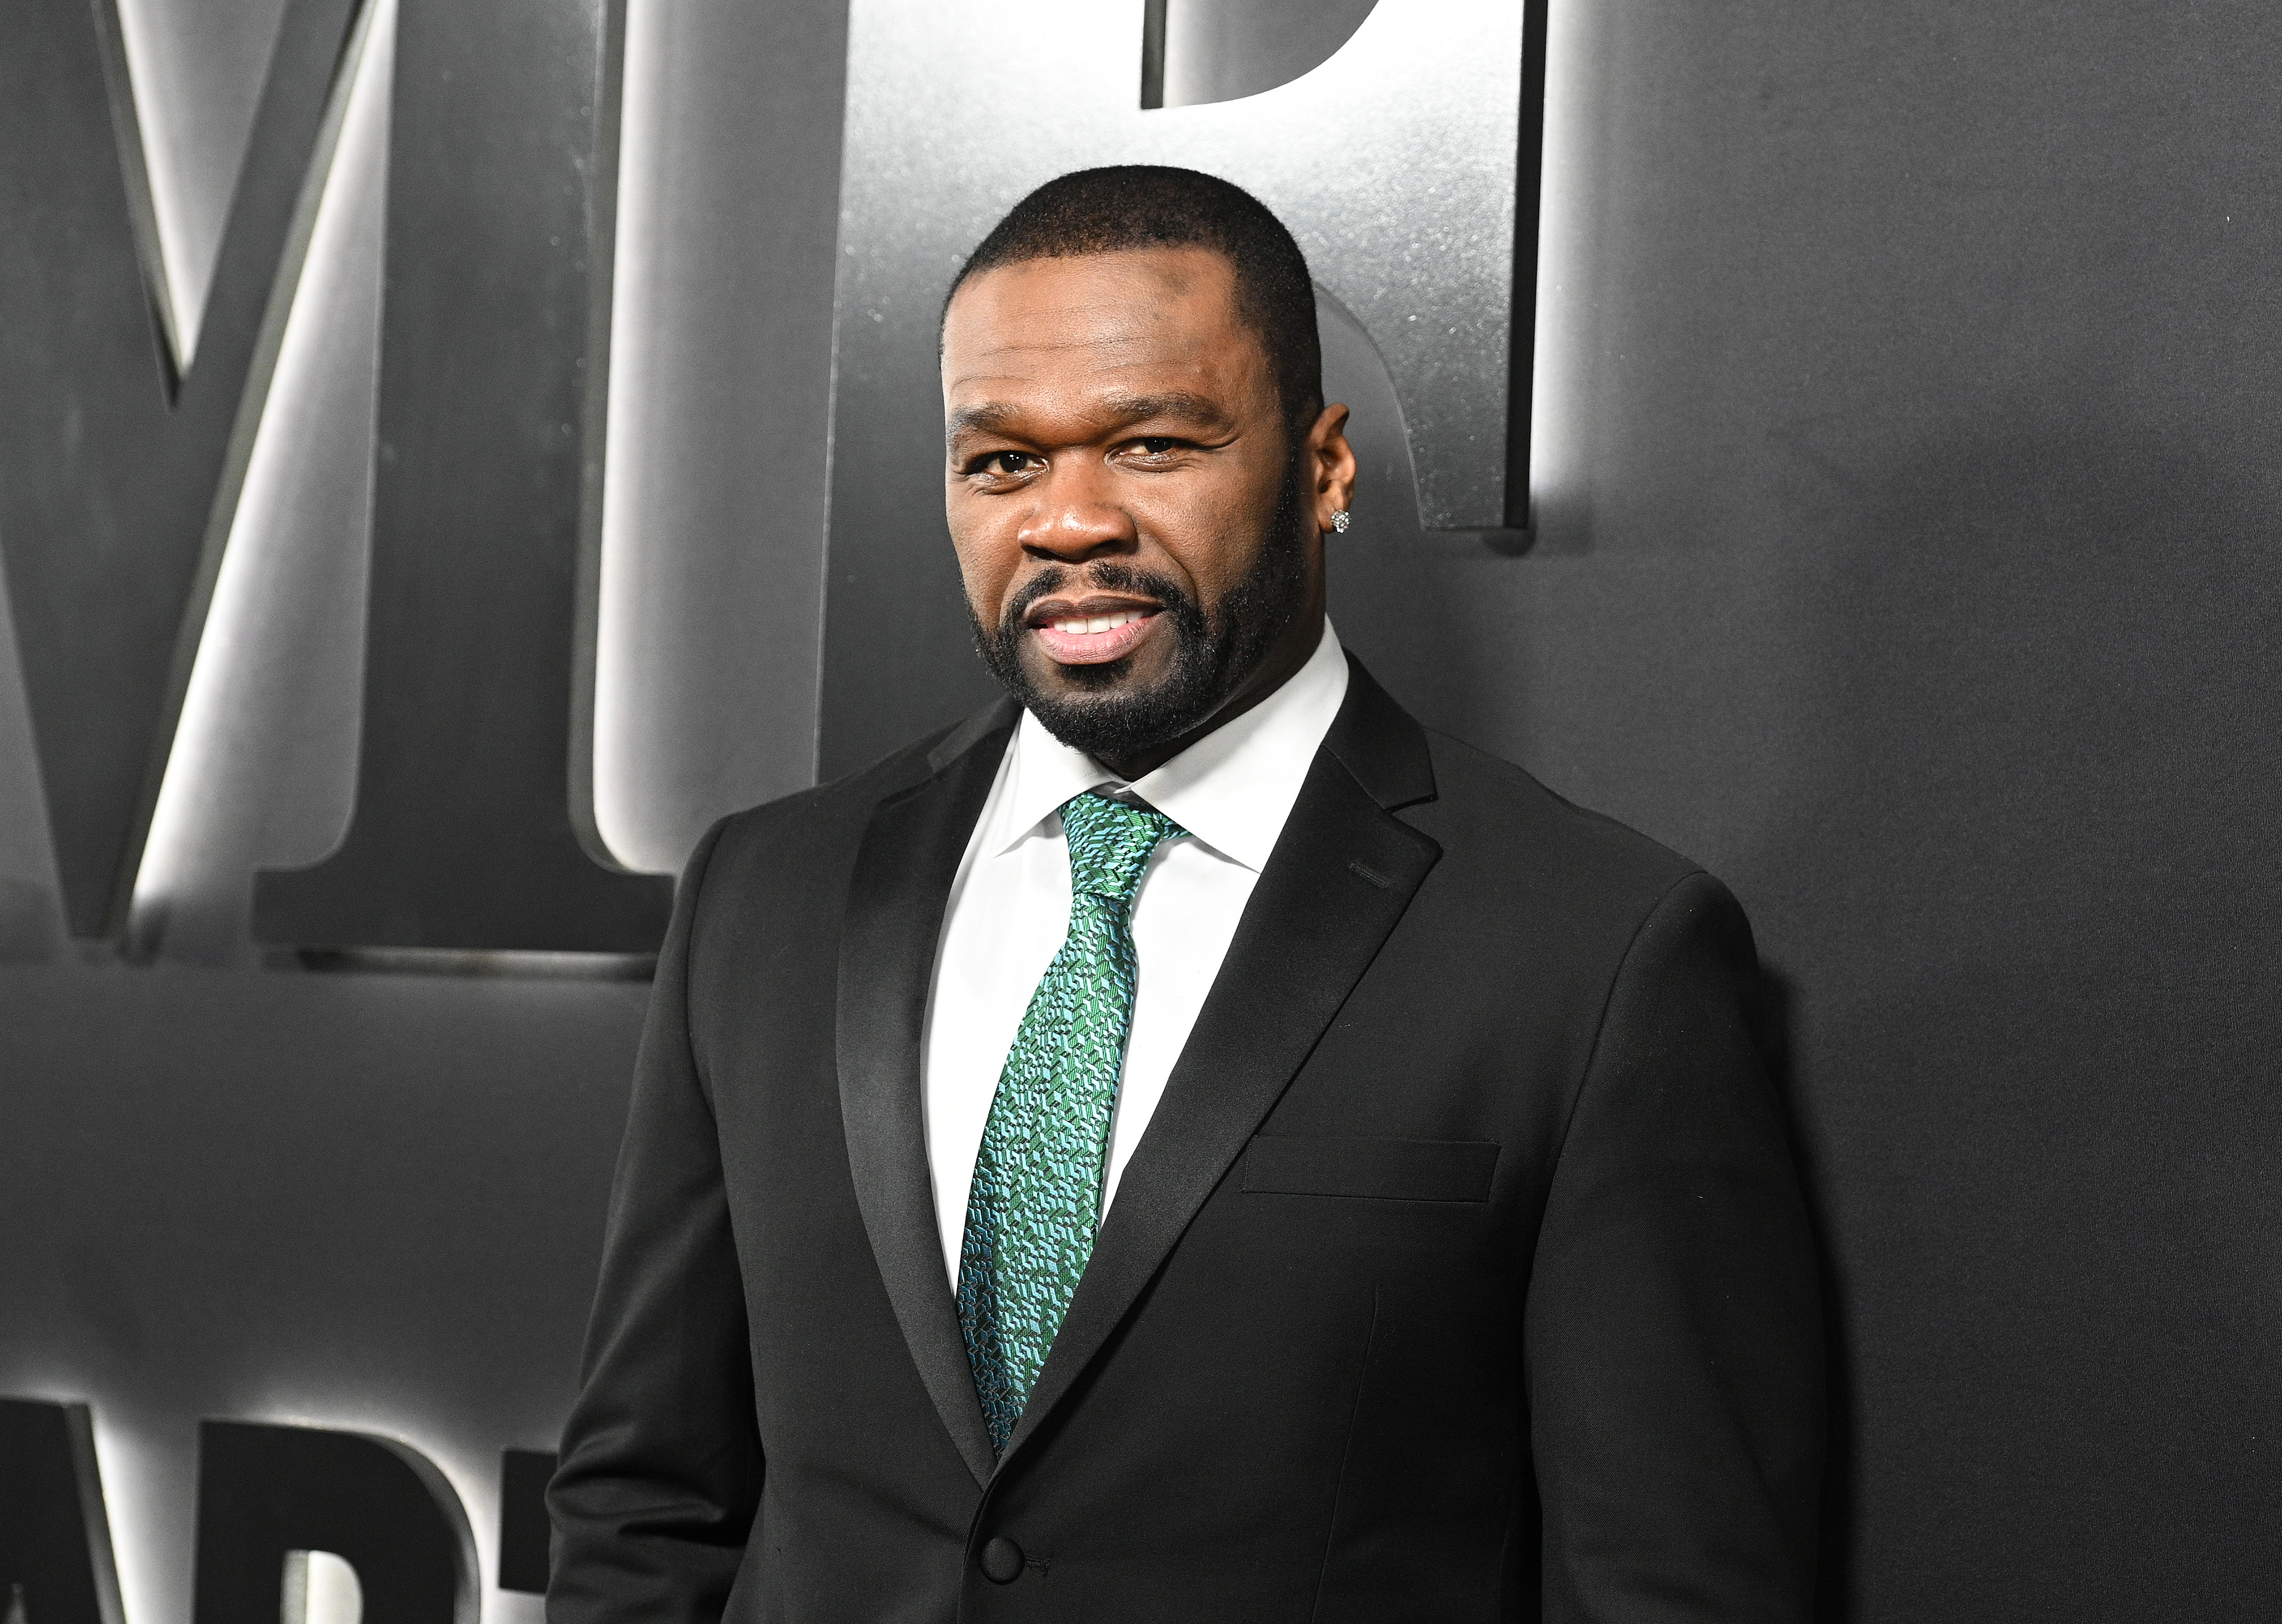 50 Cent Shades Shailene Woodley While Slamming Starz: “This Is A Dud”